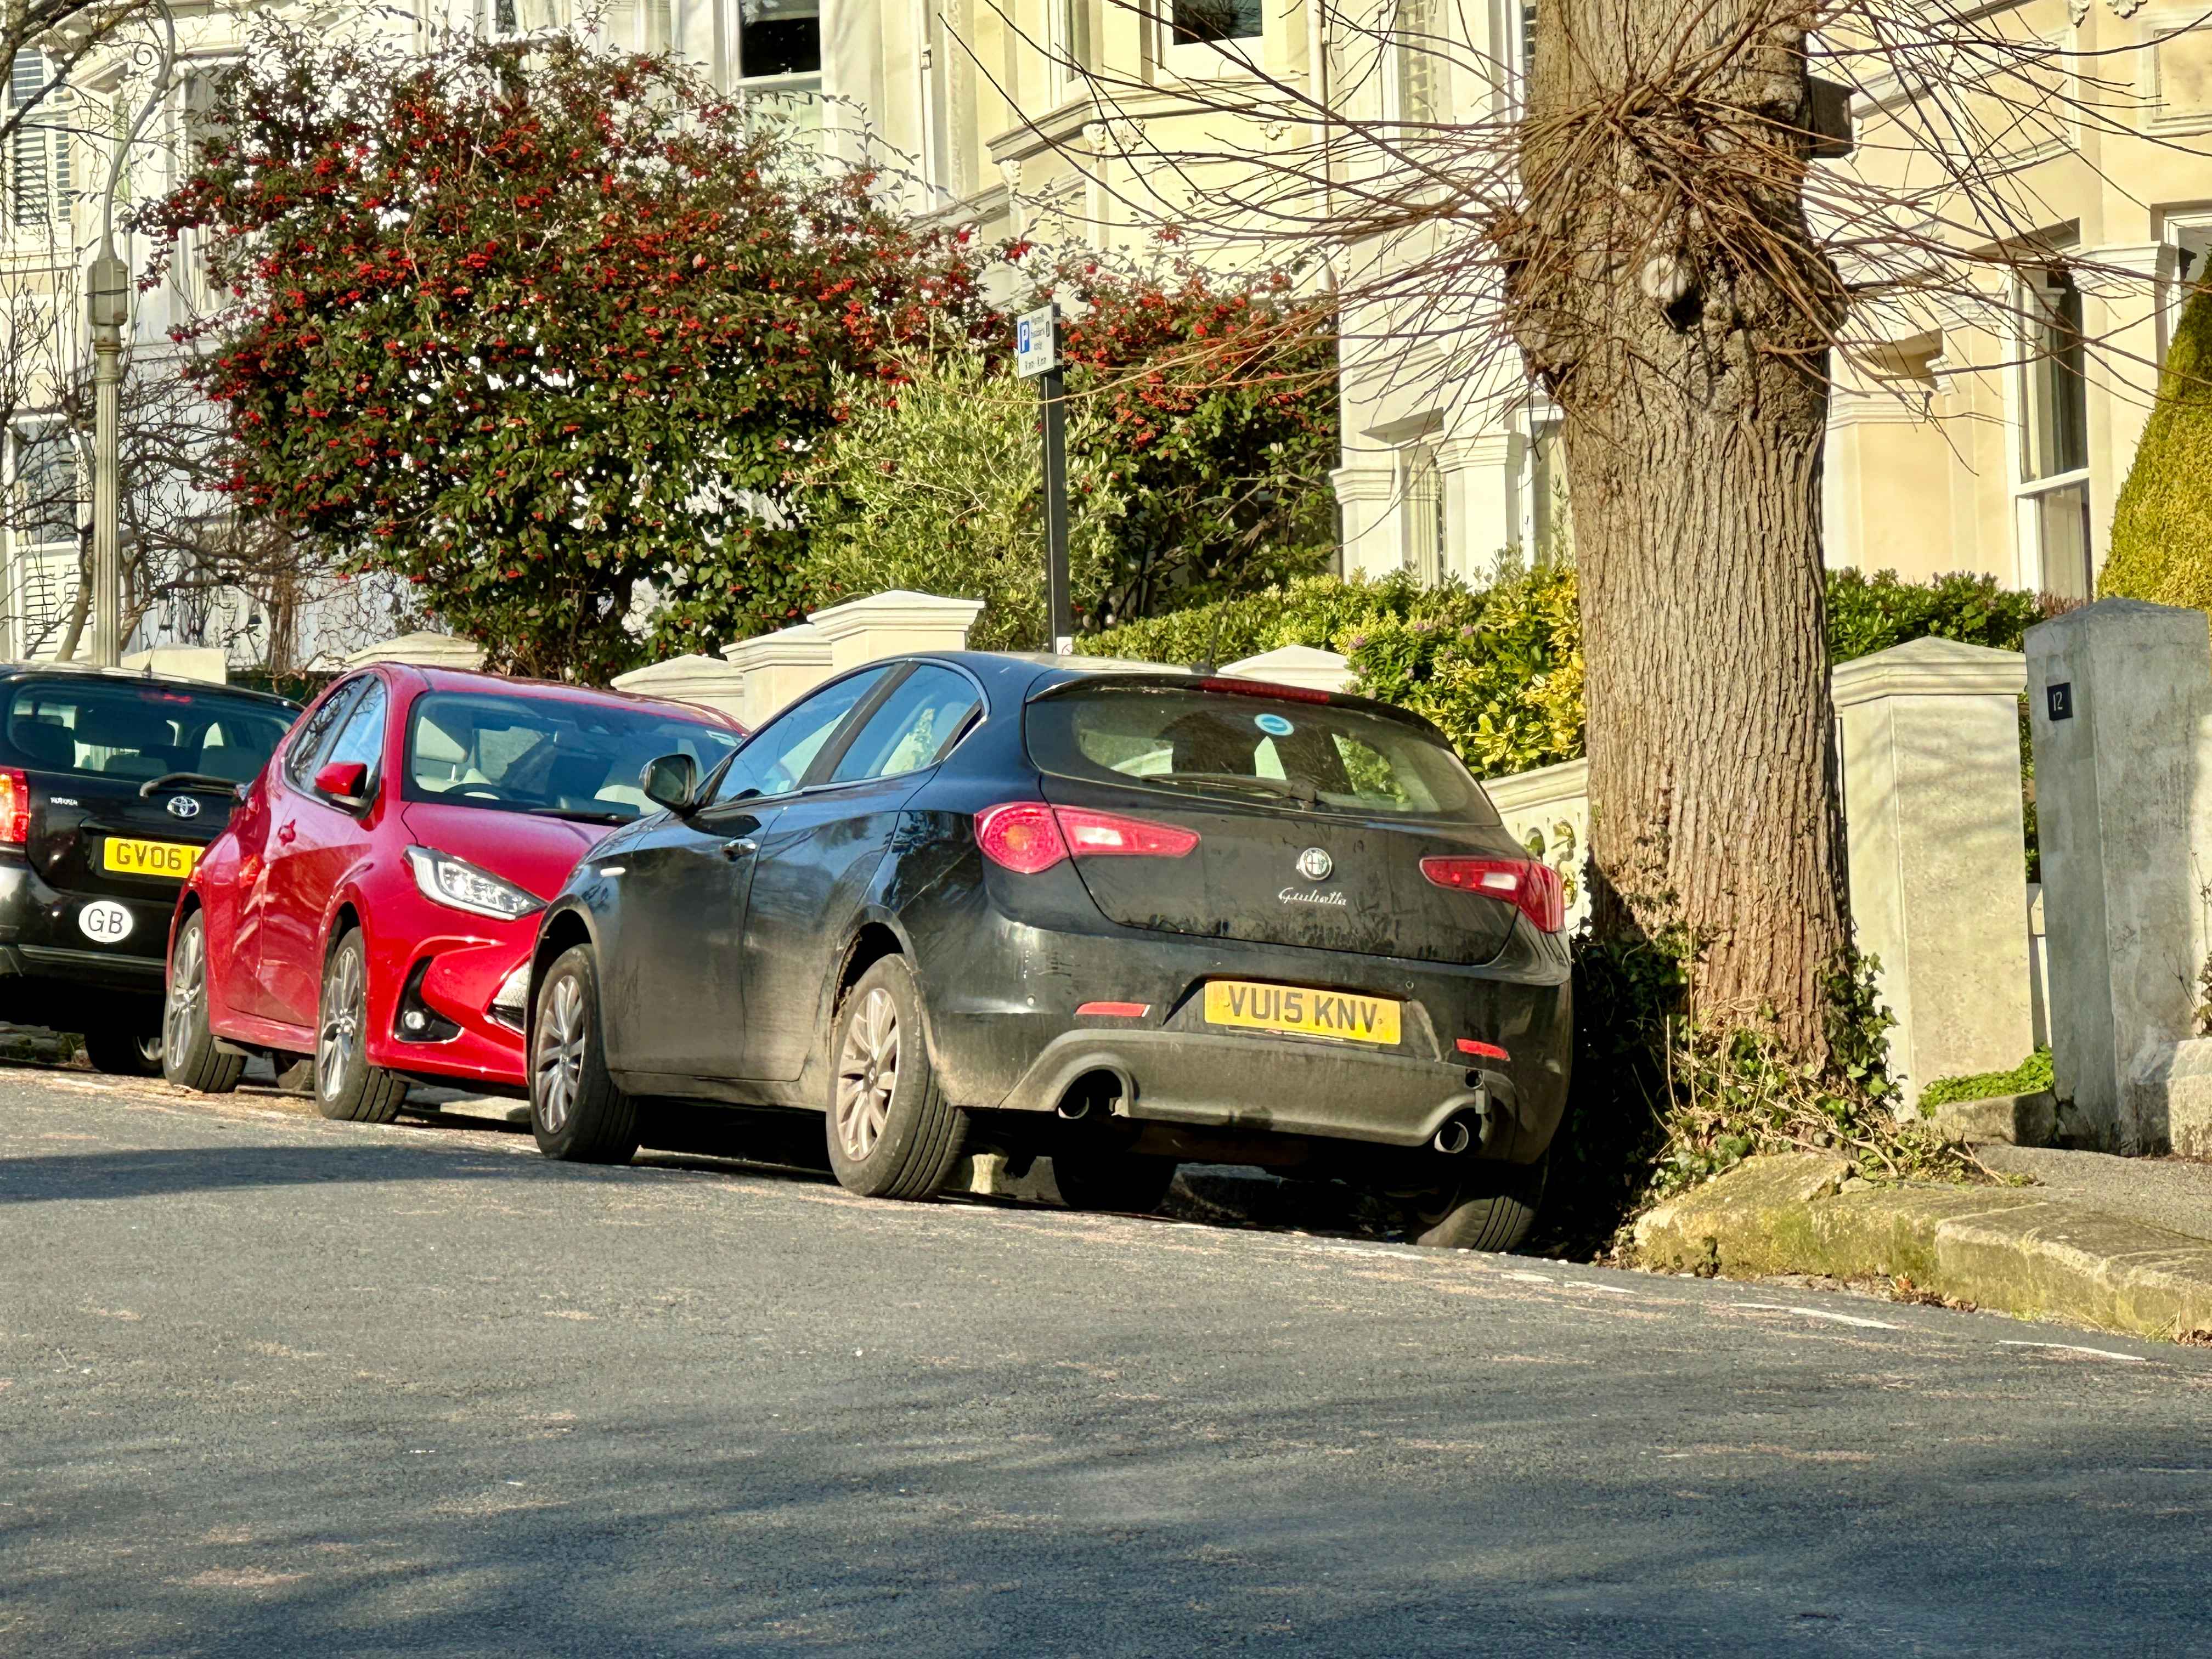 Photograph of VU15 KNV - a Black Alfa Romeo Giulietta parked in Hollingdean by a non-resident. The ninth of ten photographs supplied by the residents of Hollingdean.